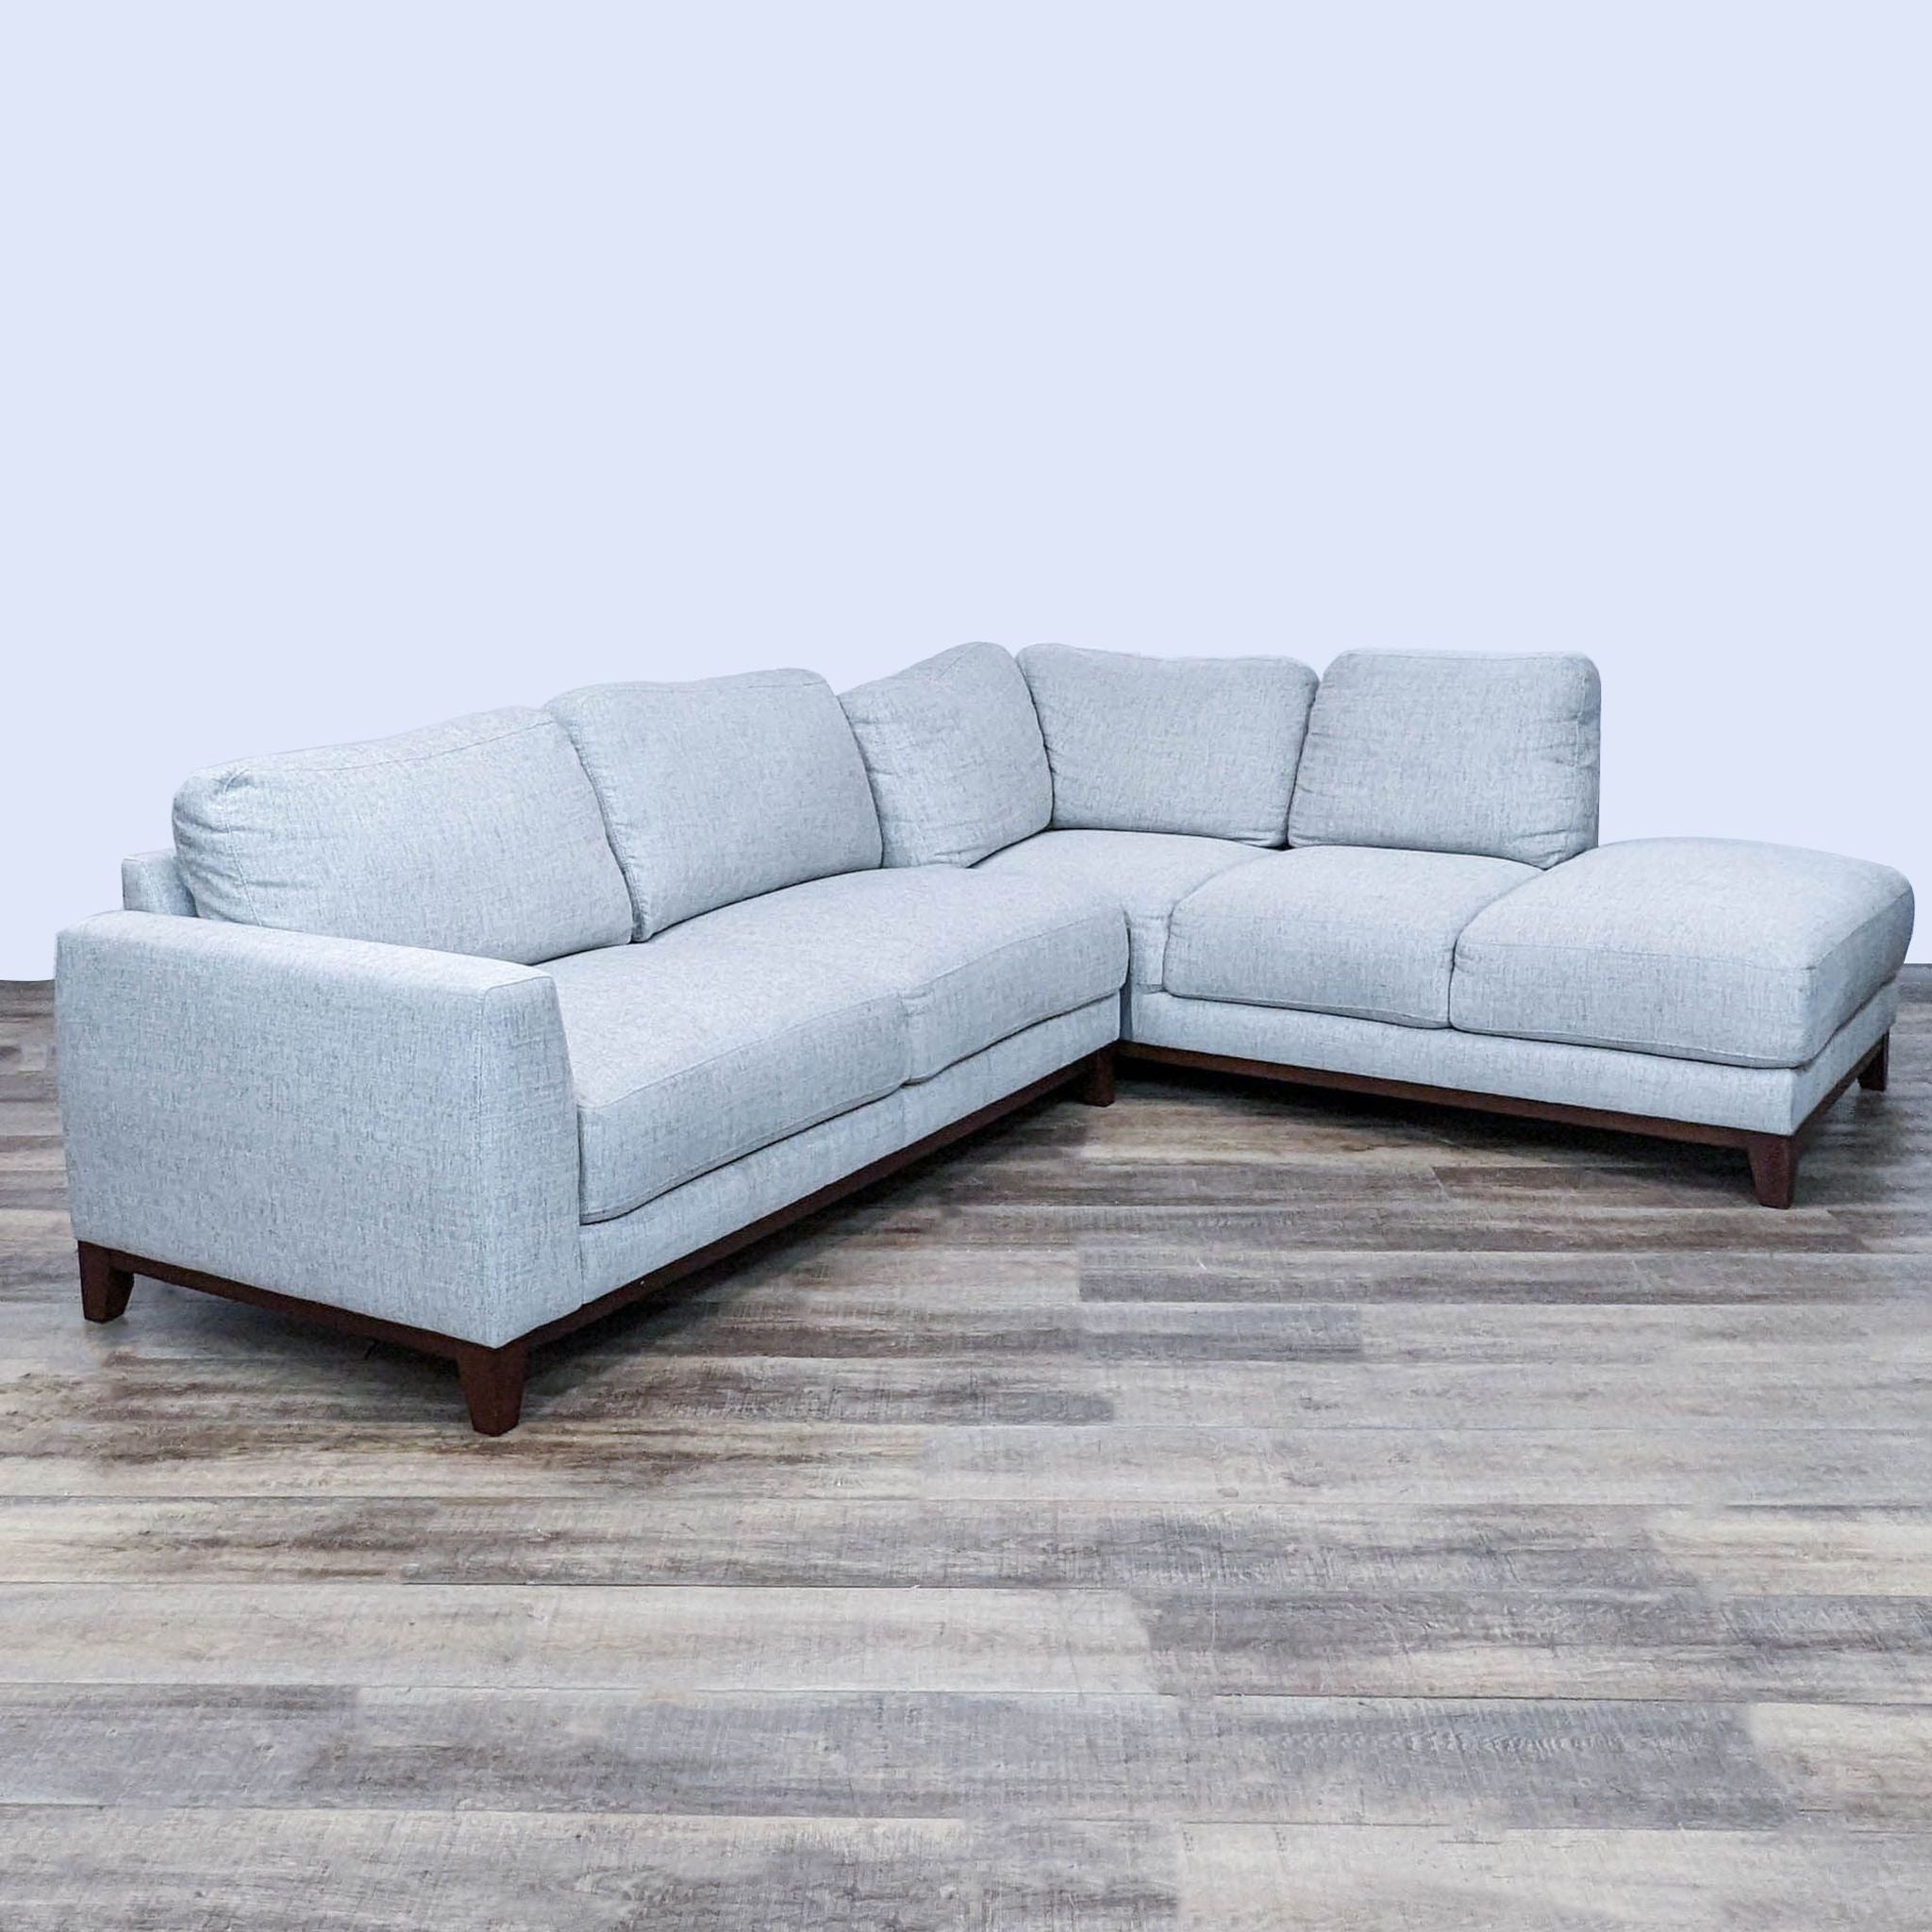 112-inch Living Spaces sectional in a neutral tone, featuring soft cushions and dark wood frame, with a chaise extension.